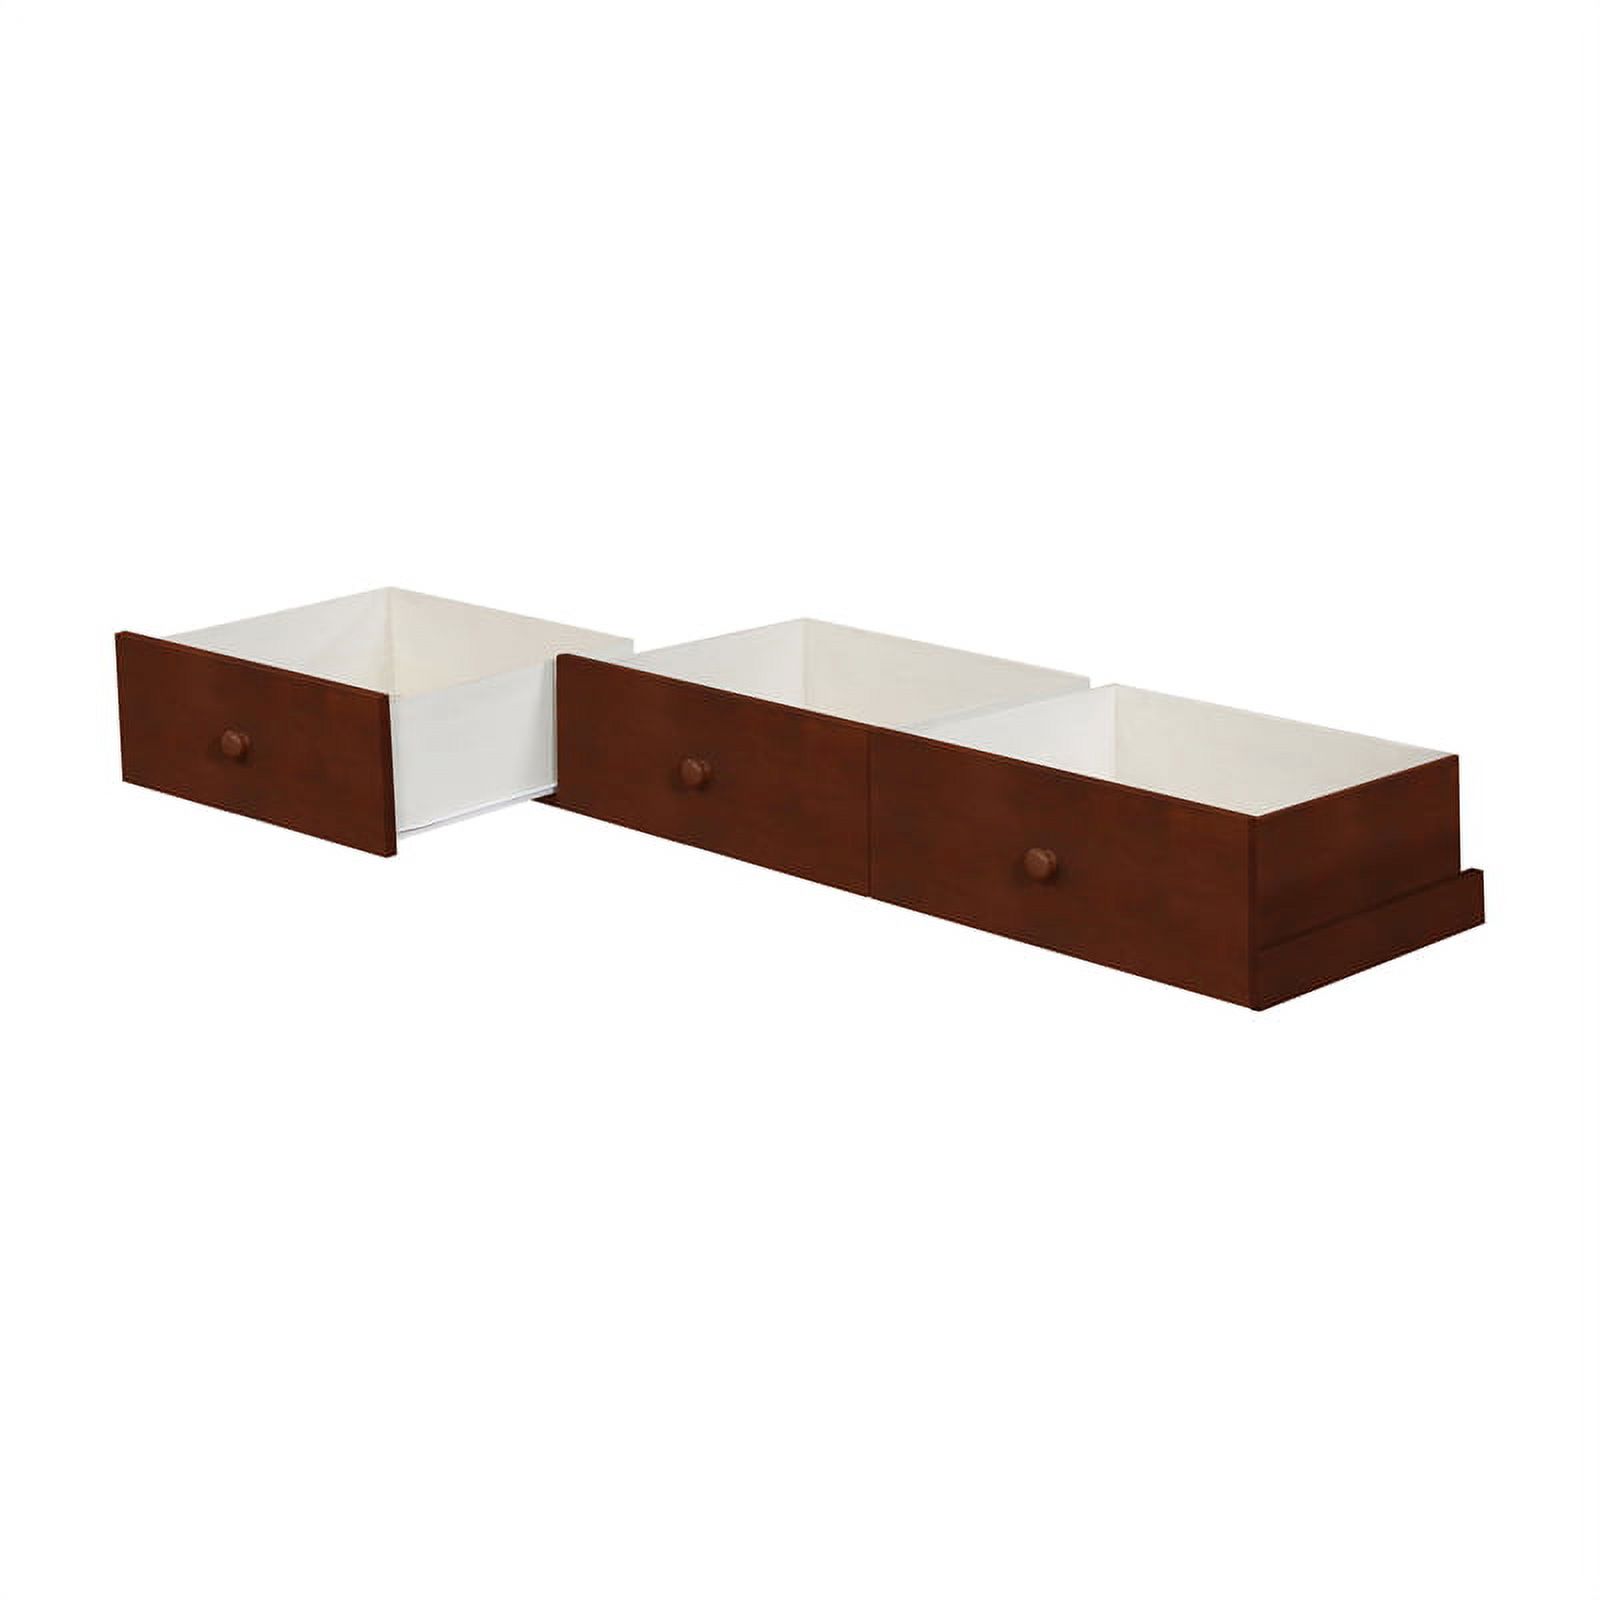 Furniture of America Gosney Cottage Wood Underbed Drawers in Cherry (Set of 3) - image 1 of 4